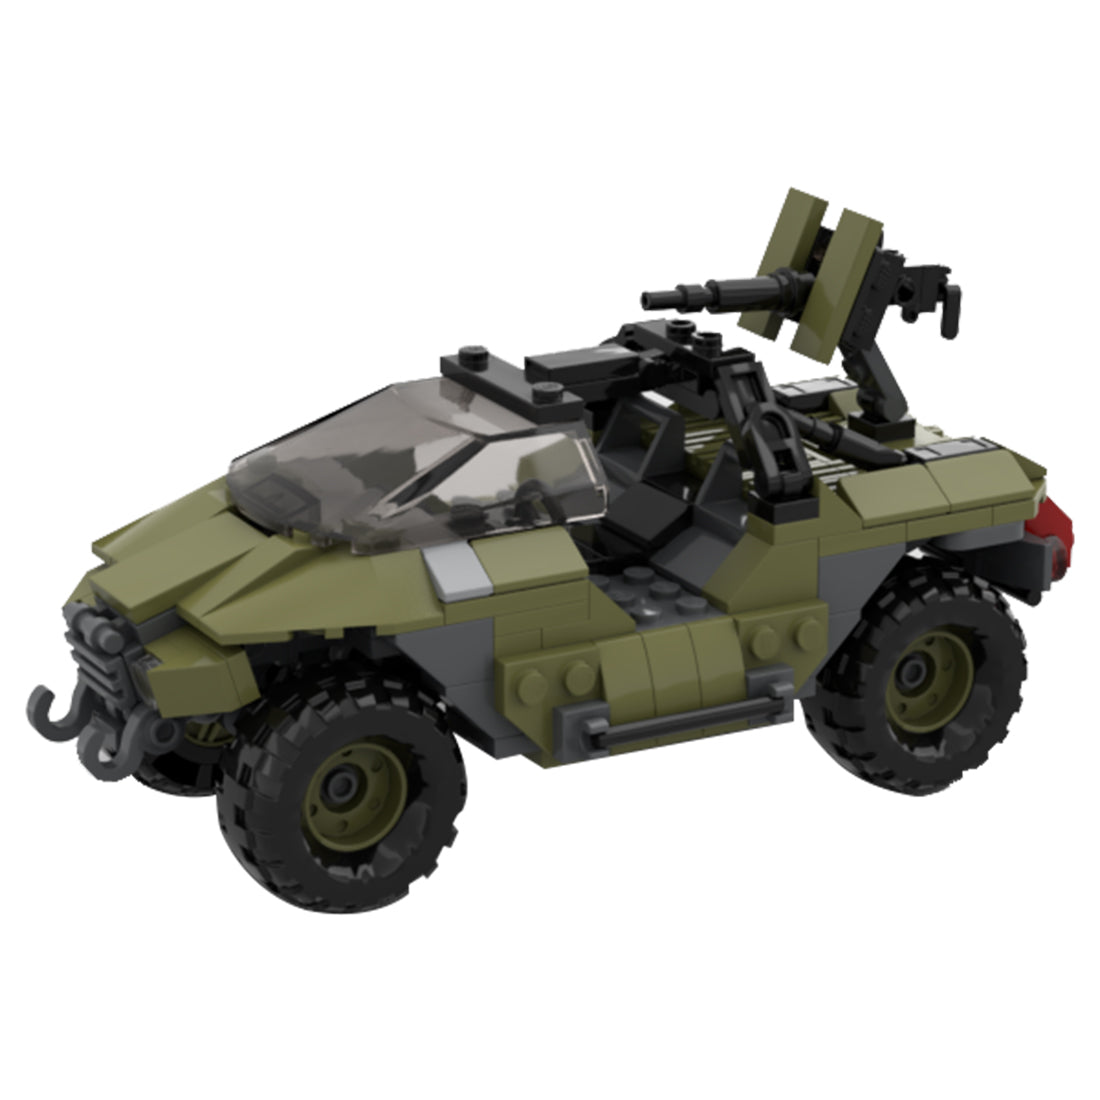 MOC-107715 M12 Military Carrier Vehicle Model